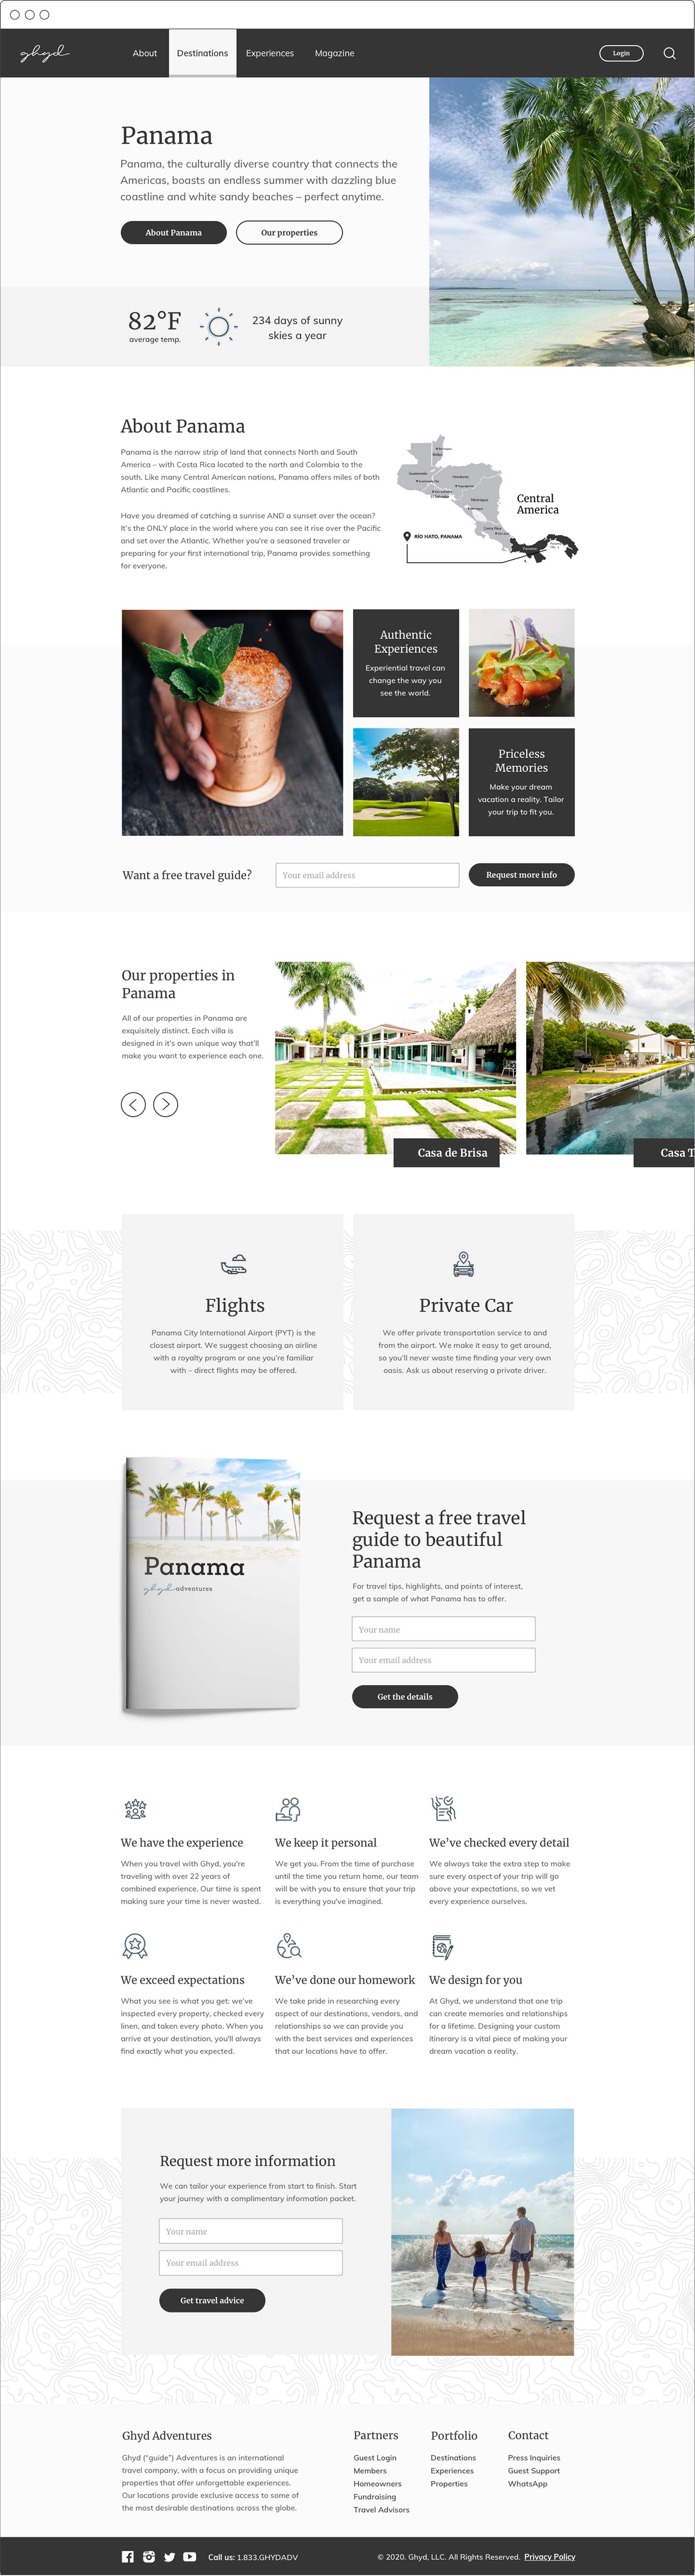 Ghyd Adventures Luxury Travel Website designed by Noisy Ghost Co.